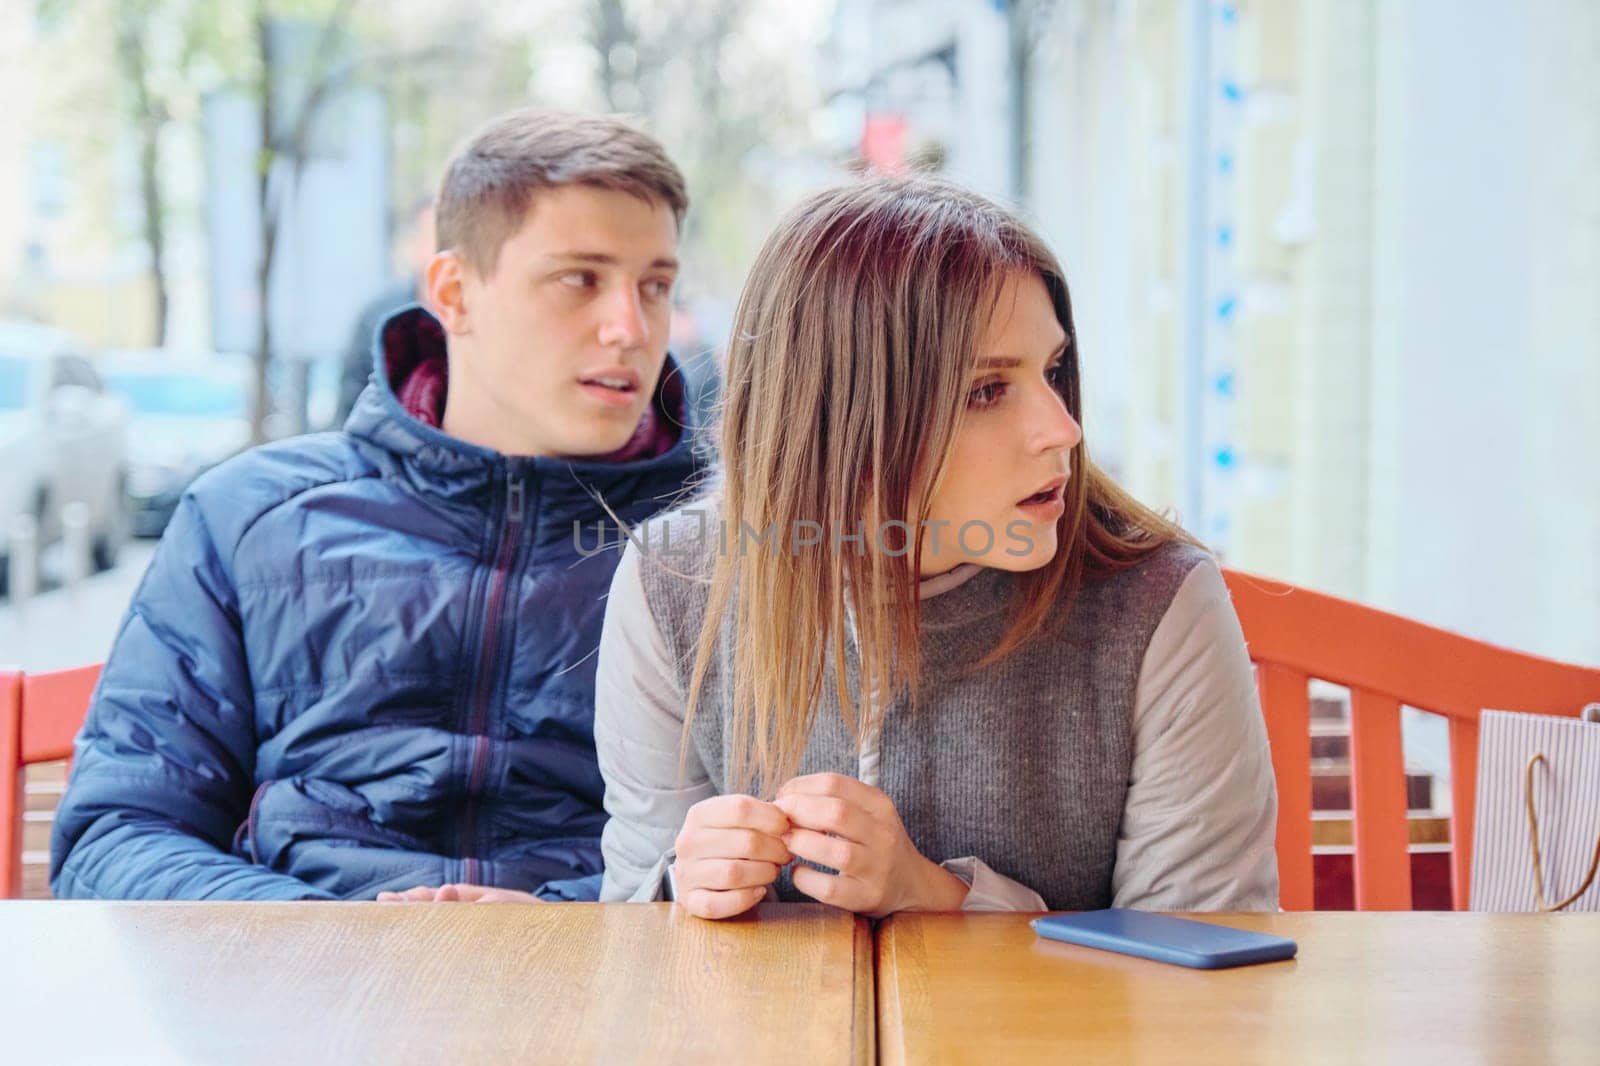 Emotional surprised young couple in outdoor cafe, sitting at the table, spring city background